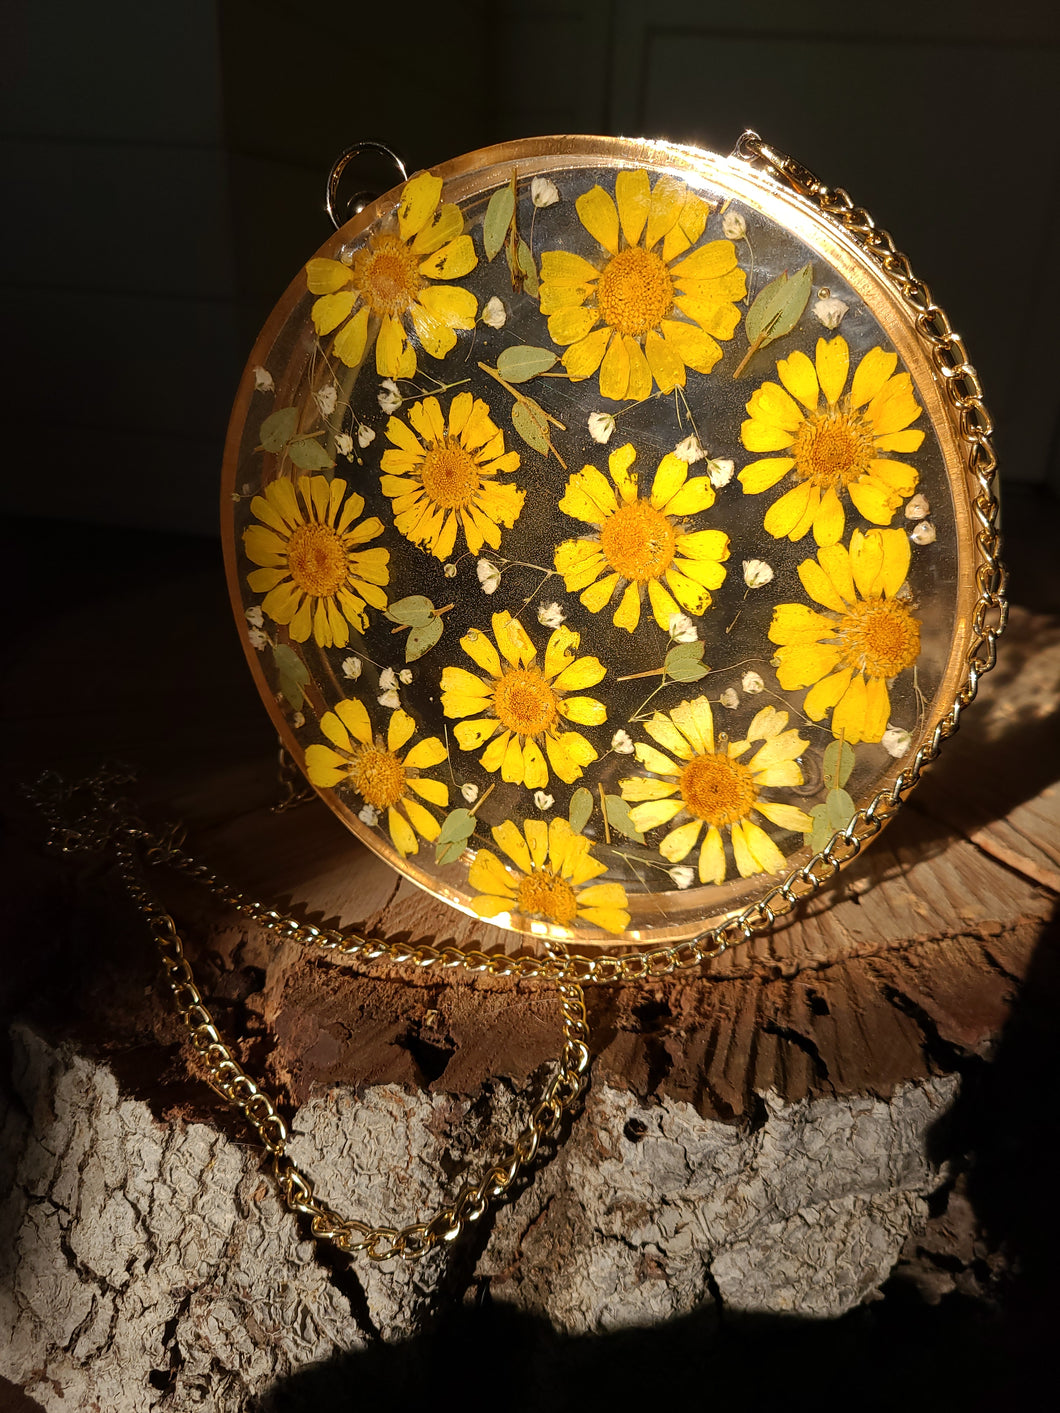 Round Boston Daisy Clutch, resin clutch, removable golden crossbody chain, 7 inches in diameter